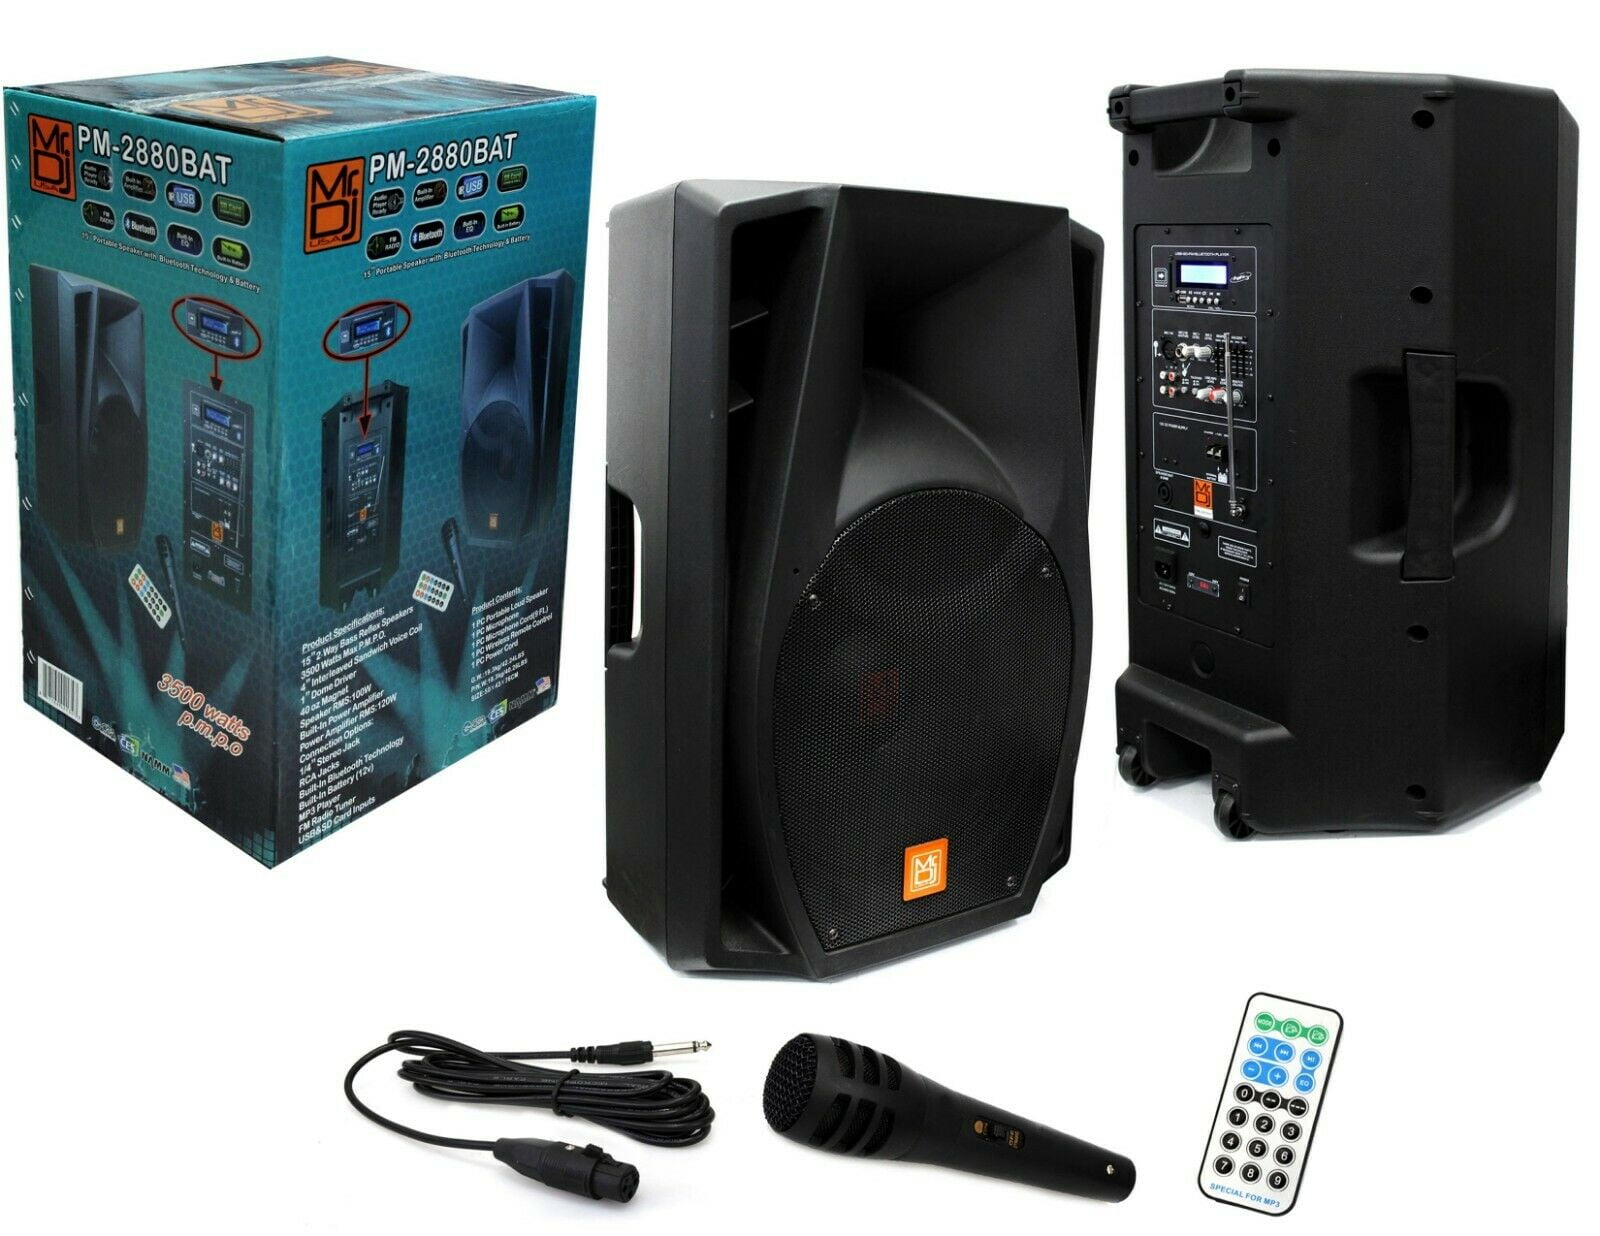 Stroll-a-Tune Stroller Speakers for iPOD™ Satellite or AM/FM Radio # 56630 MP3 